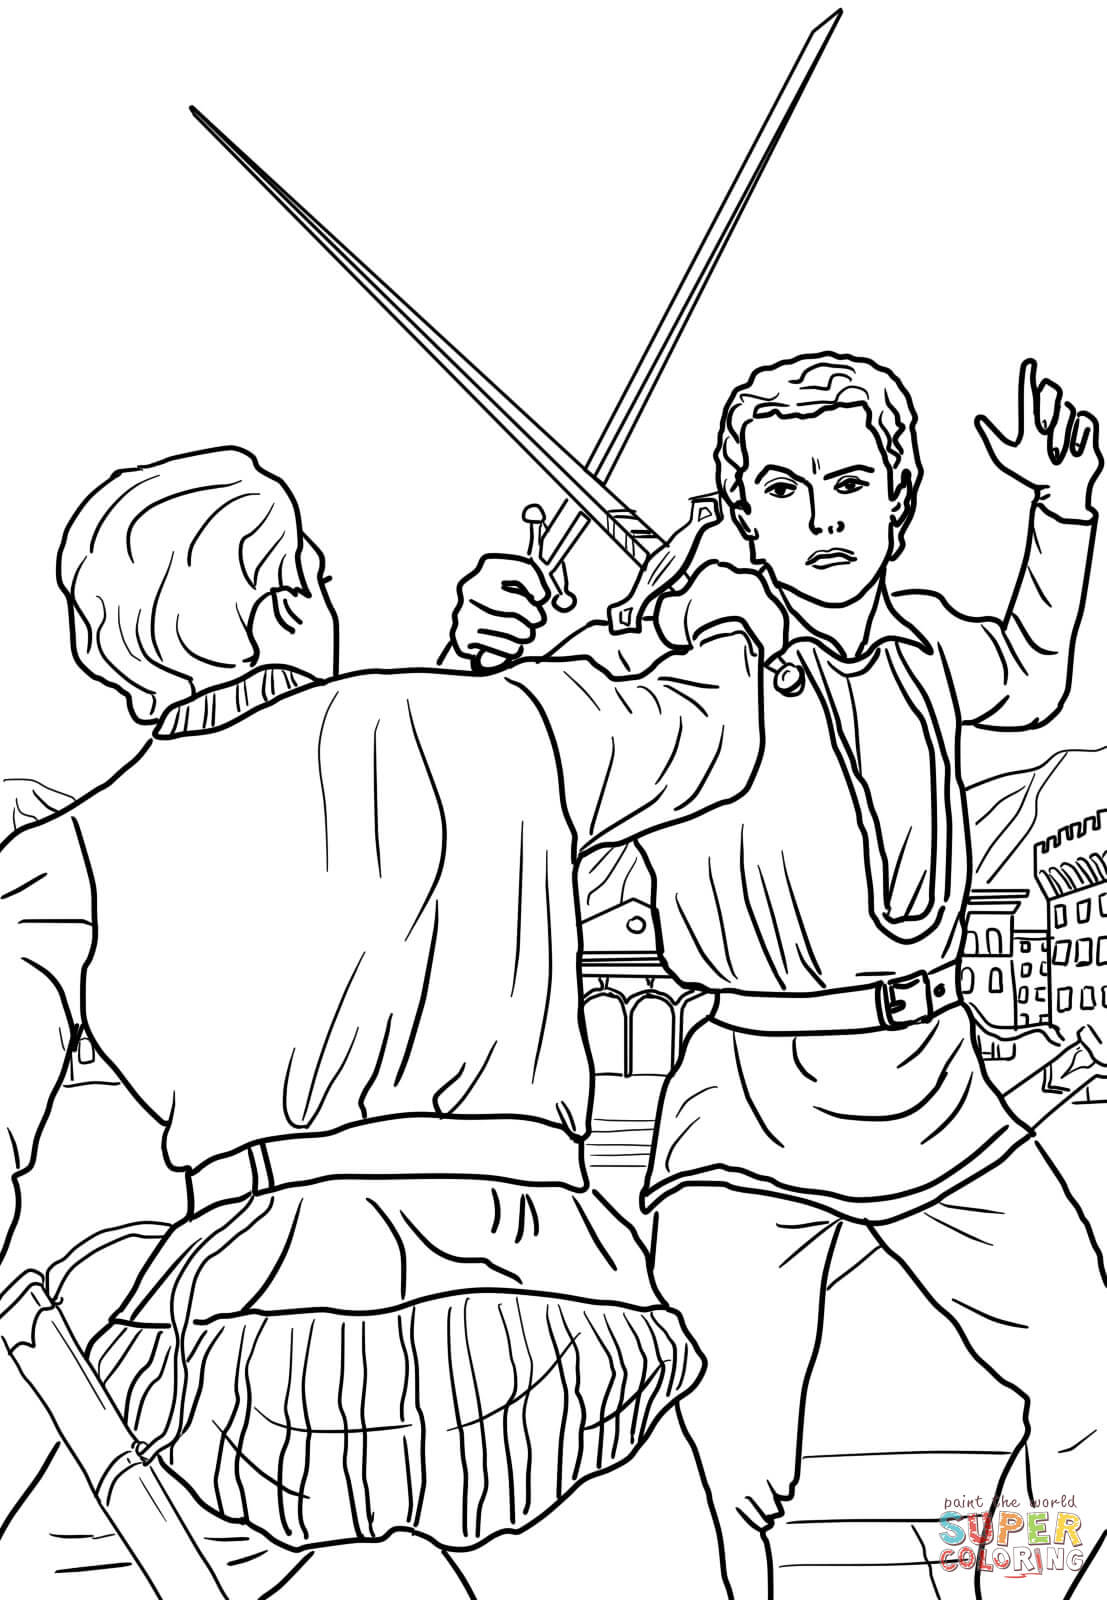 1107x1600 Romeo And Juliet Drawing Romeo And Juliet Duel Scene Co...